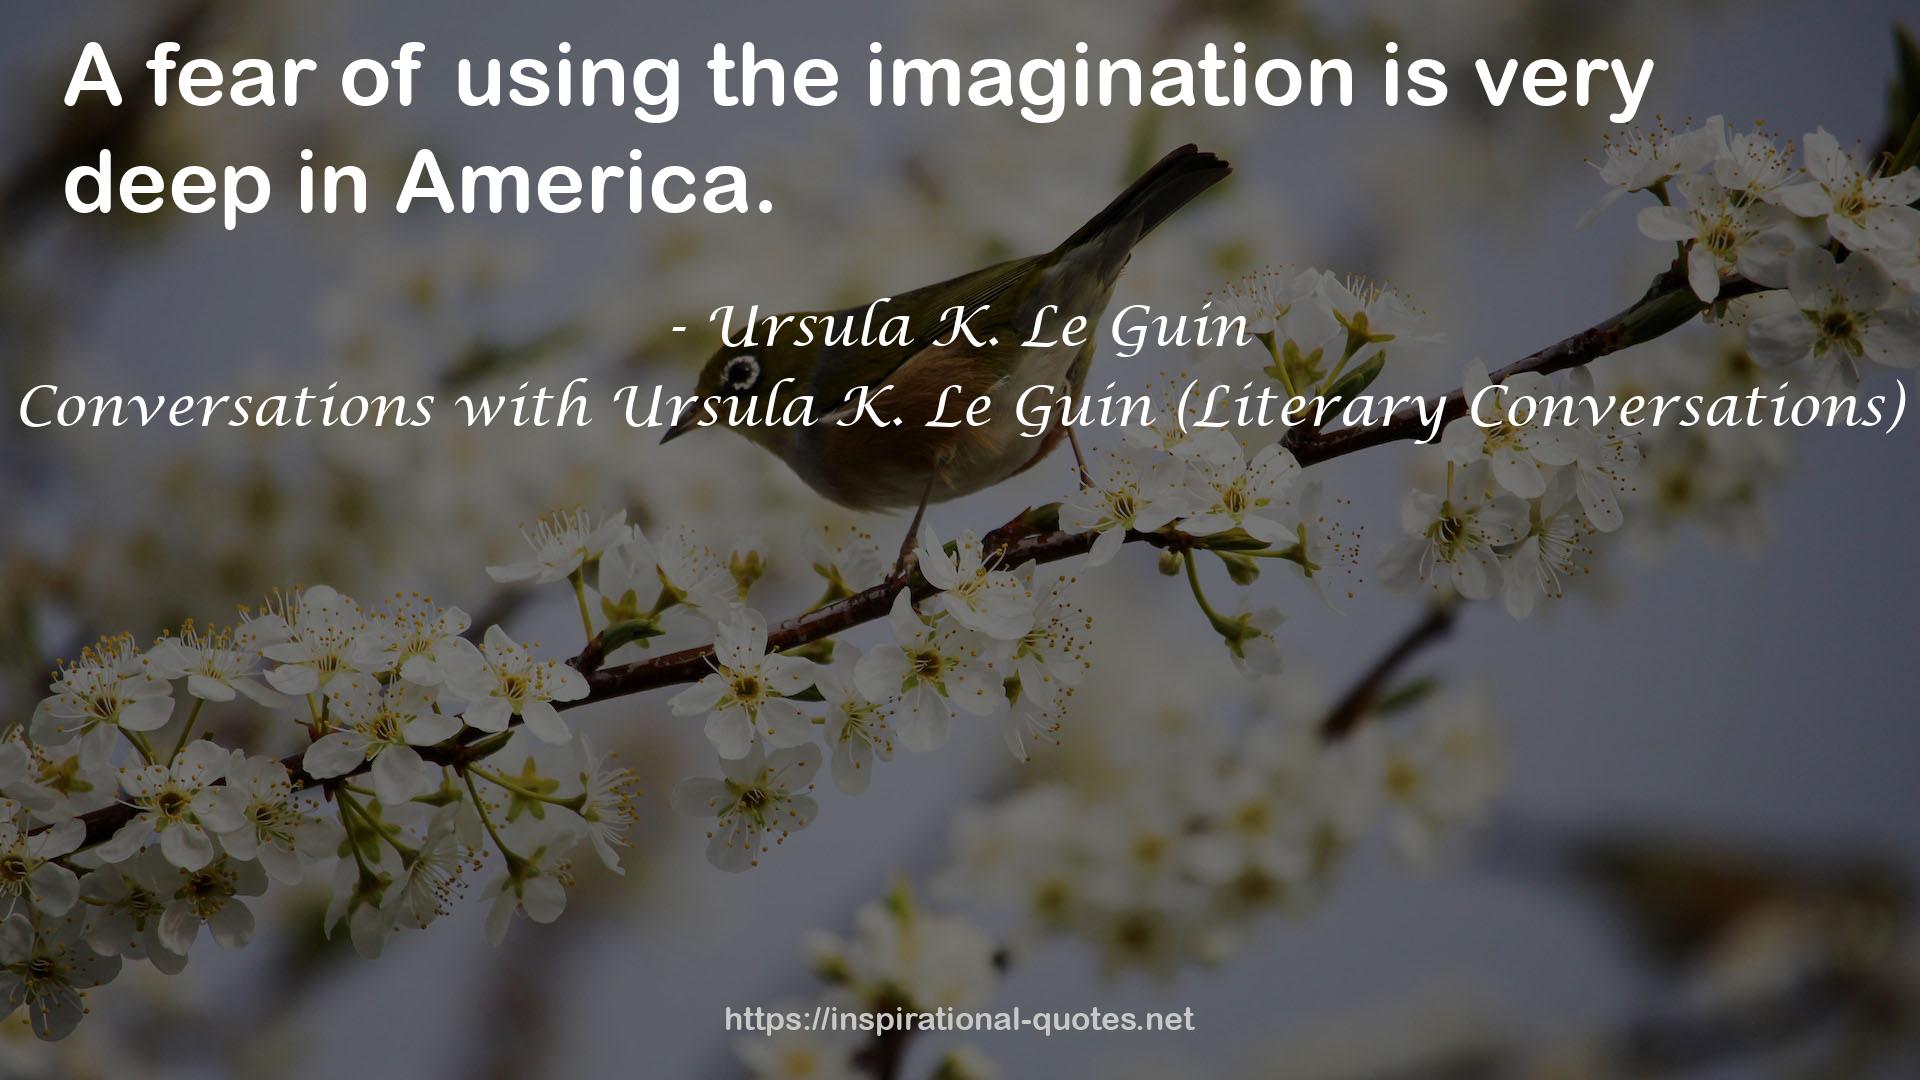 Conversations with Ursula K. Le Guin (Literary Conversations) QUOTES